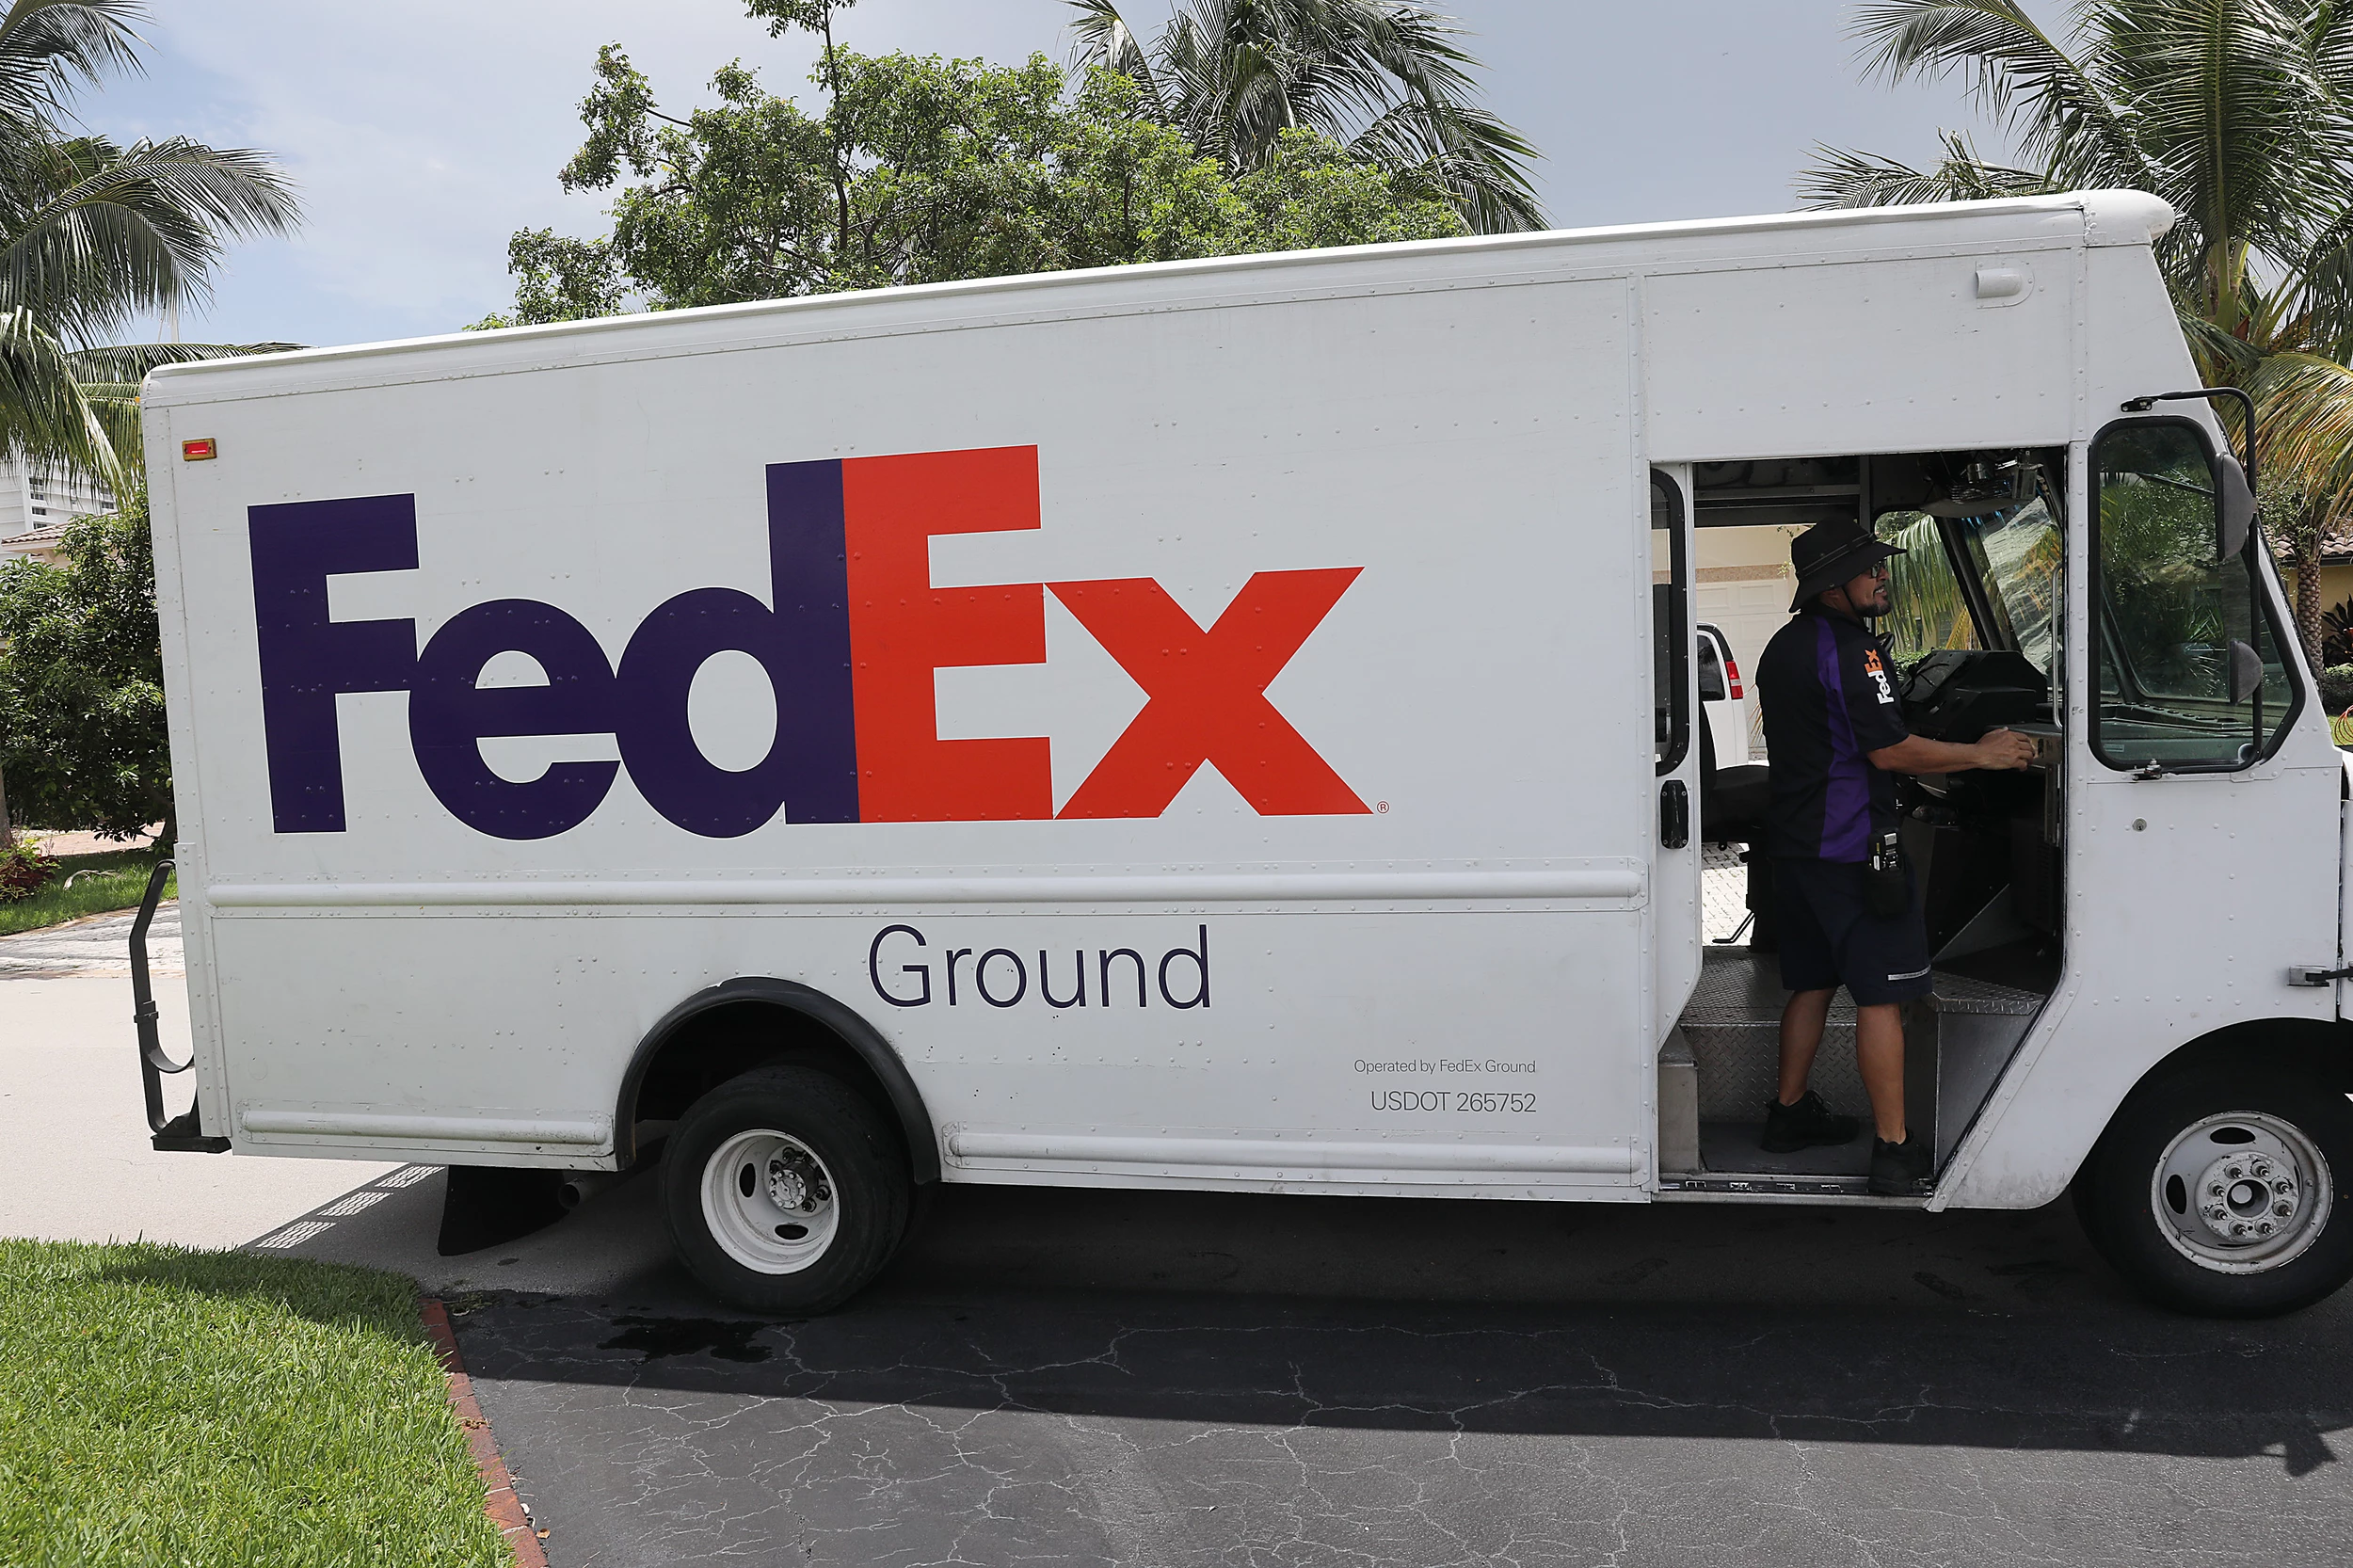 fedex tracking package